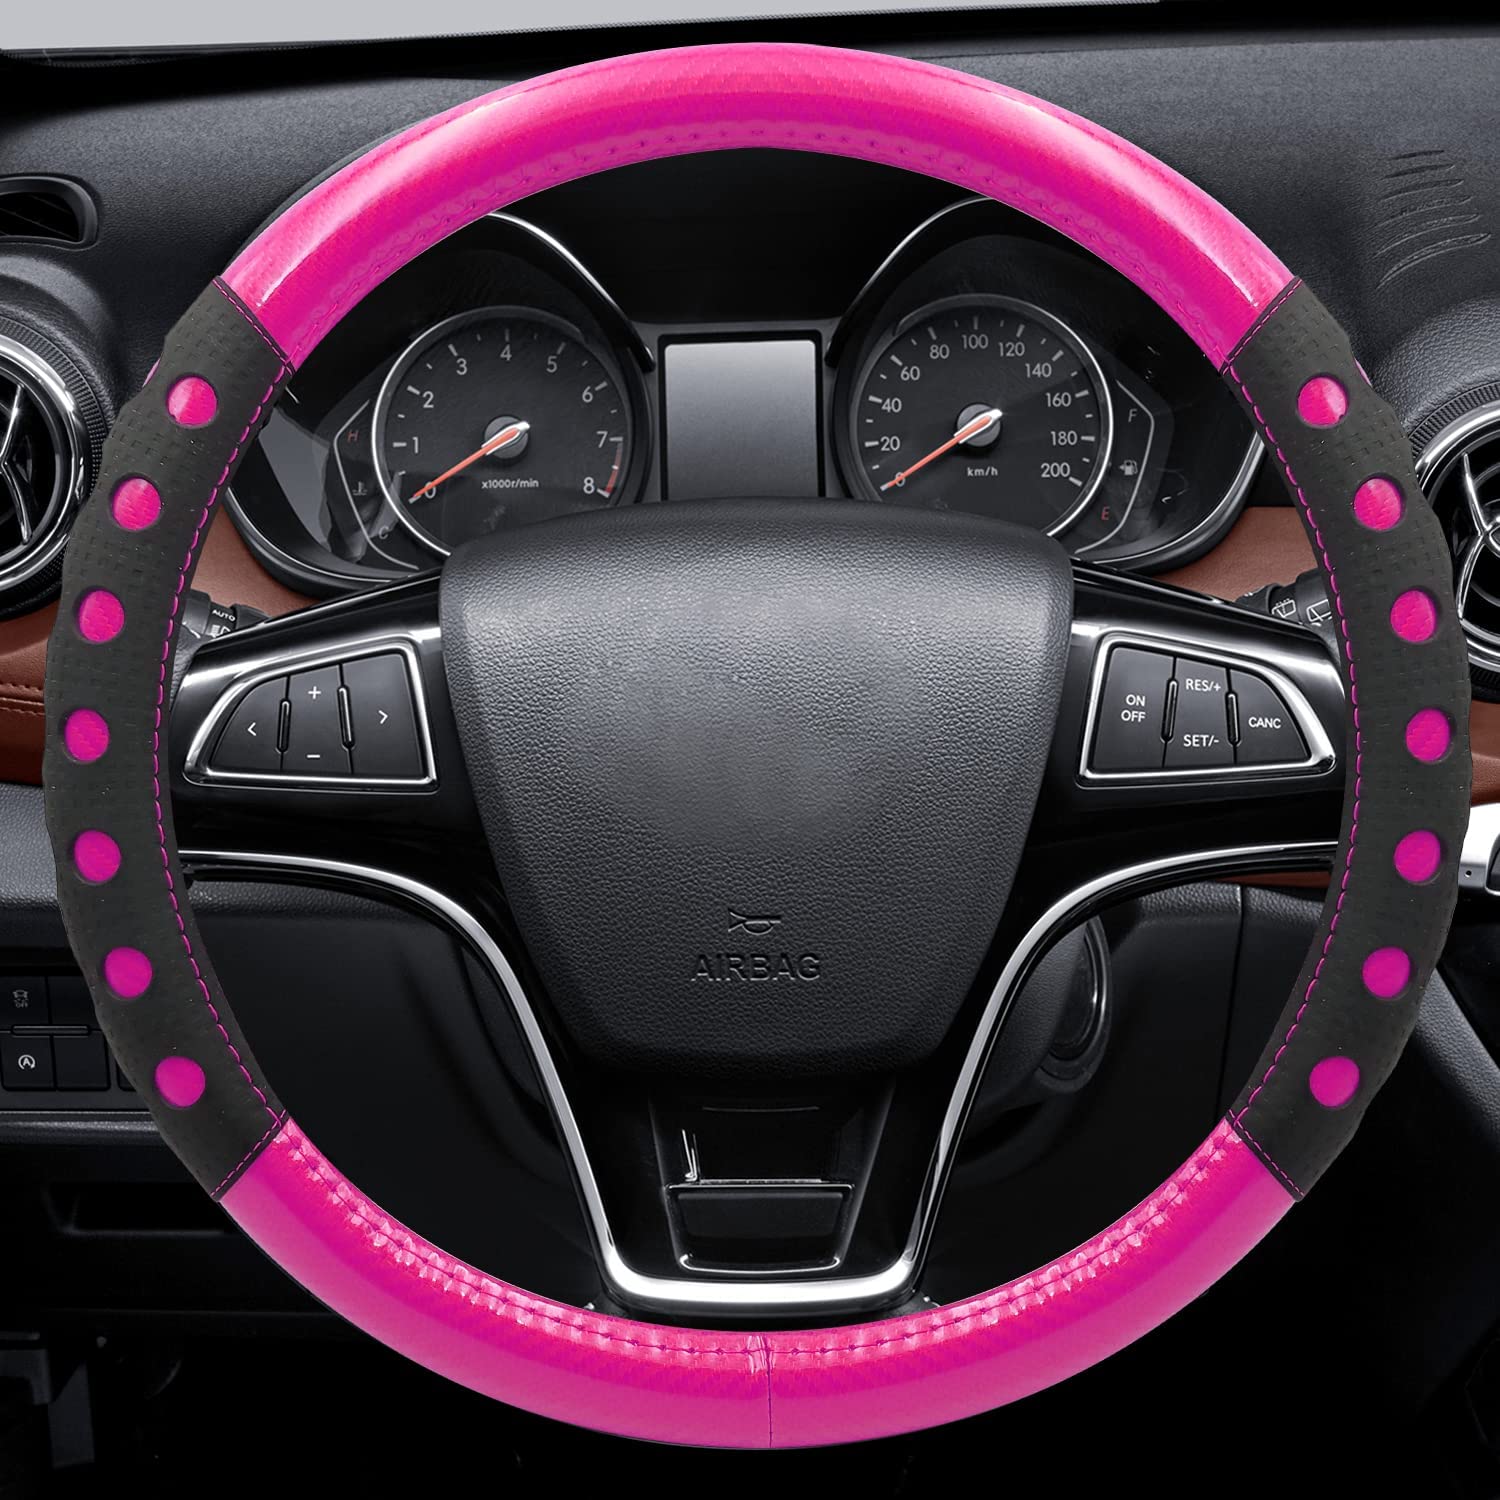 Universal Fit Leather Steering Wheel Cover with Blue Sport Grip,